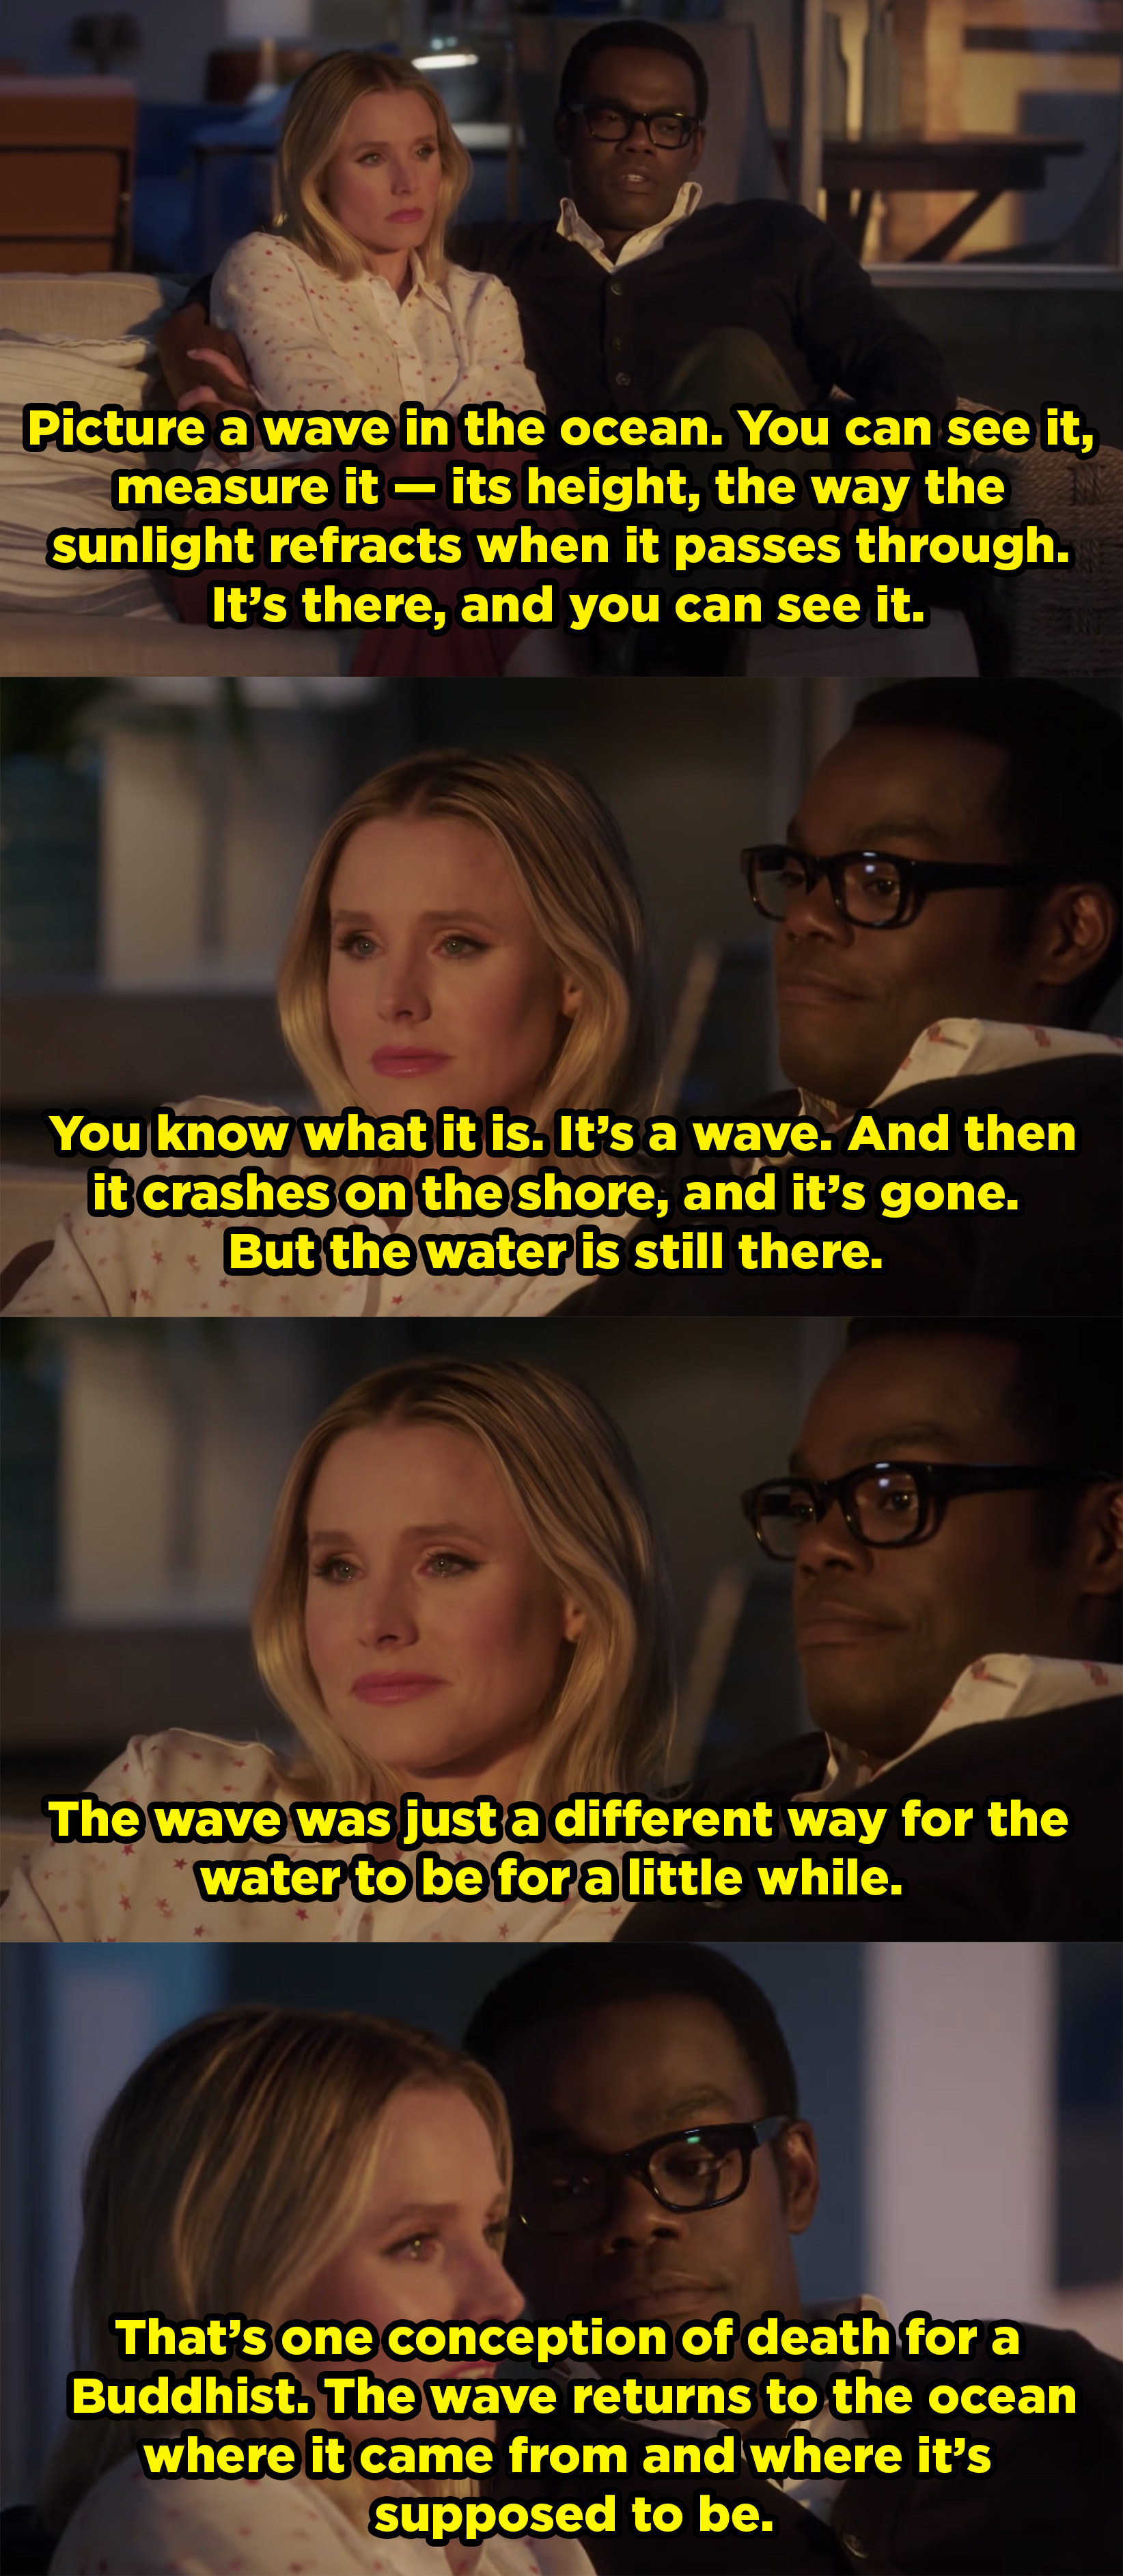 Chidi tells Eleanor about how a wave is only a wave for a little while, but its always water and once the wave crashes it goes back to the ocean, where it&#x27;s supposed to be. He relates that to the Buddhist conception of death